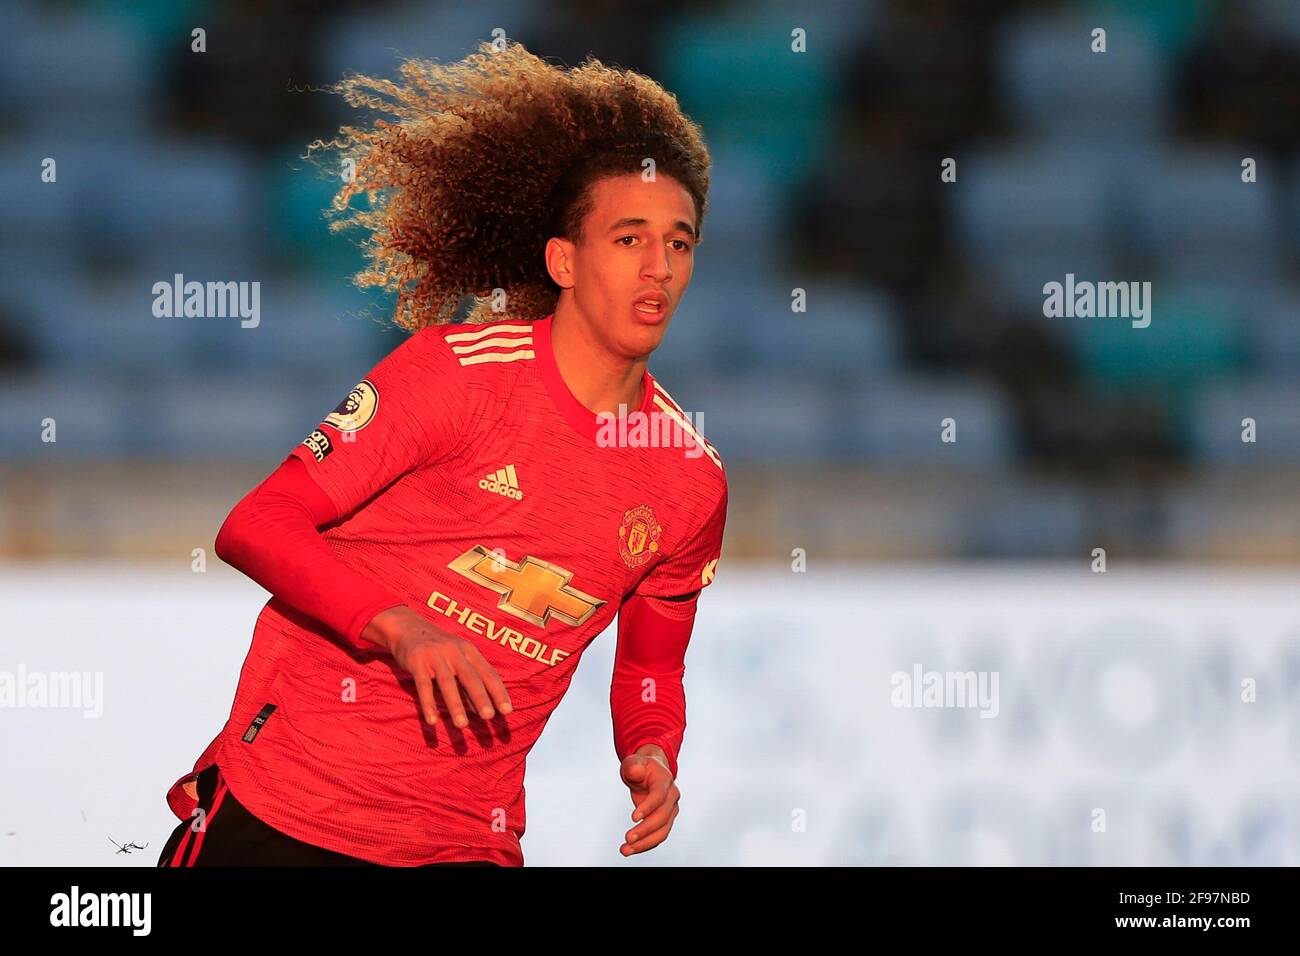 Manchester, UK. 16th Apr, 2021. Hannibal Mejbri #10 of Manchester United in Manchester, UK on 4/16/2021. (Photo by Conor Molloy/News Images/Sipa USA) Credit: Sipa USA/Alamy Live News Stock Photo